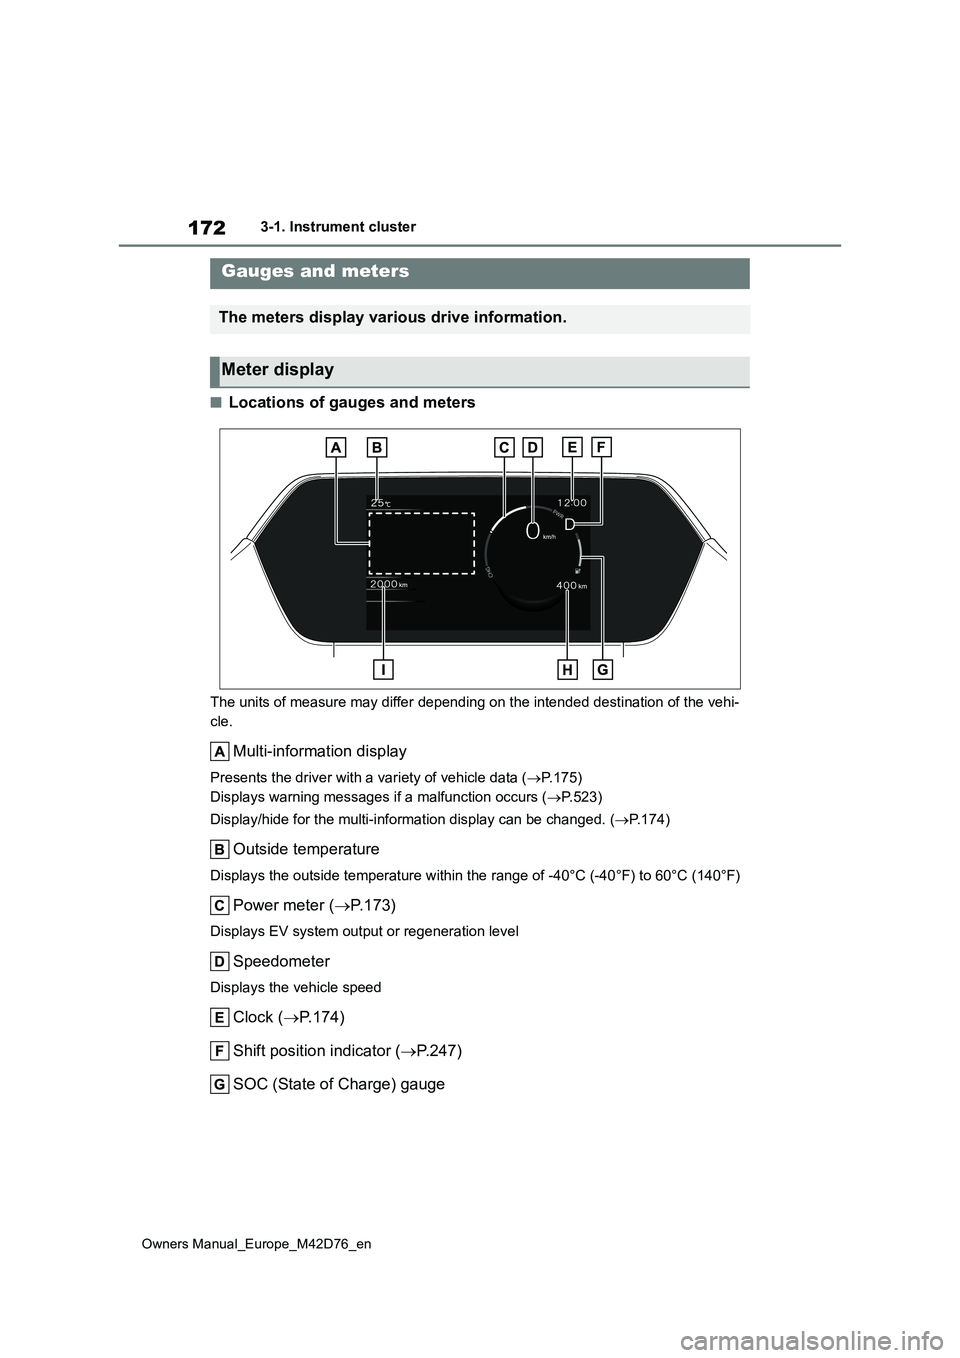 TOYOTA BZ4X 2022  Owners Manual (in English) 172
Owners Manual_Europe_M42D76_en
3-1. Instrument cluster
■Locations of gauges and meters
The units of measure may differ depending on the intended destination of the vehi- 
cle.
Multi-information 